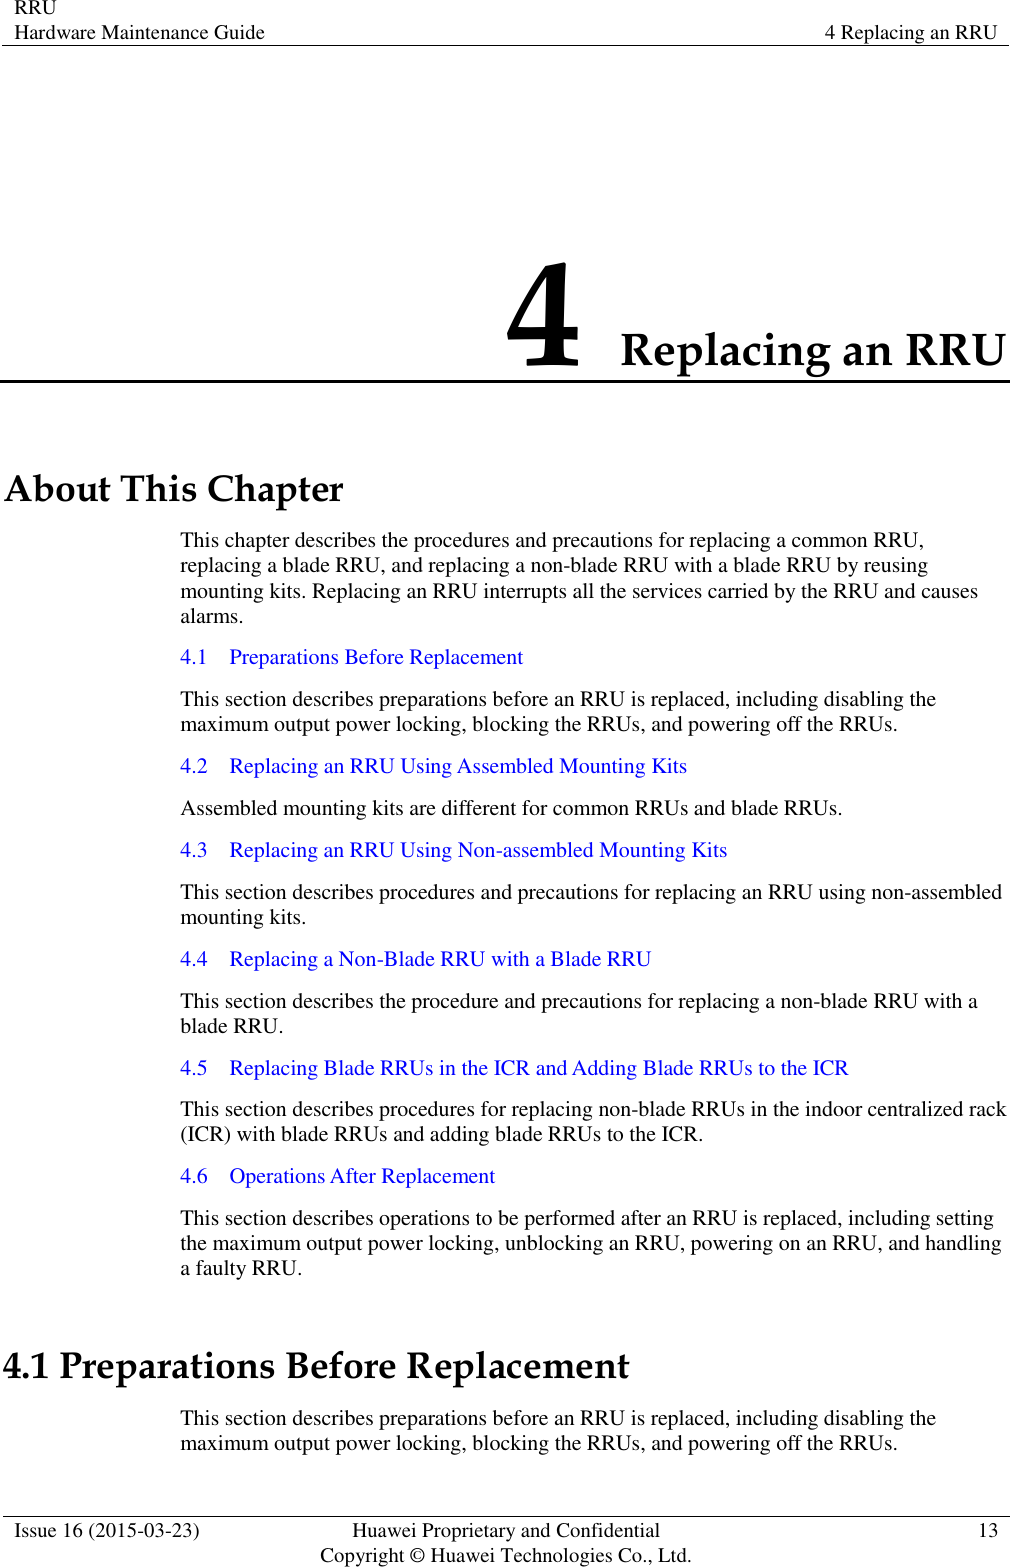 RRU Hardware Maintenance Guide 4 Replacing an RRU  Issue 16 (2015-03-23) Huawei Proprietary and Confidential                                     Copyright © Huawei Technologies Co., Ltd. 13  4 Replacing an RRU About This Chapter This chapter describes the procedures and precautions for replacing a common RRU, replacing a blade RRU, and replacing a non-blade RRU with a blade RRU by reusing mounting kits. Replacing an RRU interrupts all the services carried by the RRU and causes alarms. 4.1    Preparations Before Replacement This section describes preparations before an RRU is replaced, including disabling the maximum output power locking, blocking the RRUs, and powering off the RRUs. 4.2    Replacing an RRU Using Assembled Mounting Kits Assembled mounting kits are different for common RRUs and blade RRUs. 4.3    Replacing an RRU Using Non-assembled Mounting Kits This section describes procedures and precautions for replacing an RRU using non-assembled mounting kits. 4.4    Replacing a Non-Blade RRU with a Blade RRU This section describes the procedure and precautions for replacing a non-blade RRU with a blade RRU. 4.5    Replacing Blade RRUs in the ICR and Adding Blade RRUs to the ICR This section describes procedures for replacing non-blade RRUs in the indoor centralized rack (ICR) with blade RRUs and adding blade RRUs to the ICR. 4.6    Operations After Replacement This section describes operations to be performed after an RRU is replaced, including setting the maximum output power locking, unblocking an RRU, powering on an RRU, and handling a faulty RRU. 4.1 Preparations Before Replacement This section describes preparations before an RRU is replaced, including disabling the maximum output power locking, blocking the RRUs, and powering off the RRUs. 